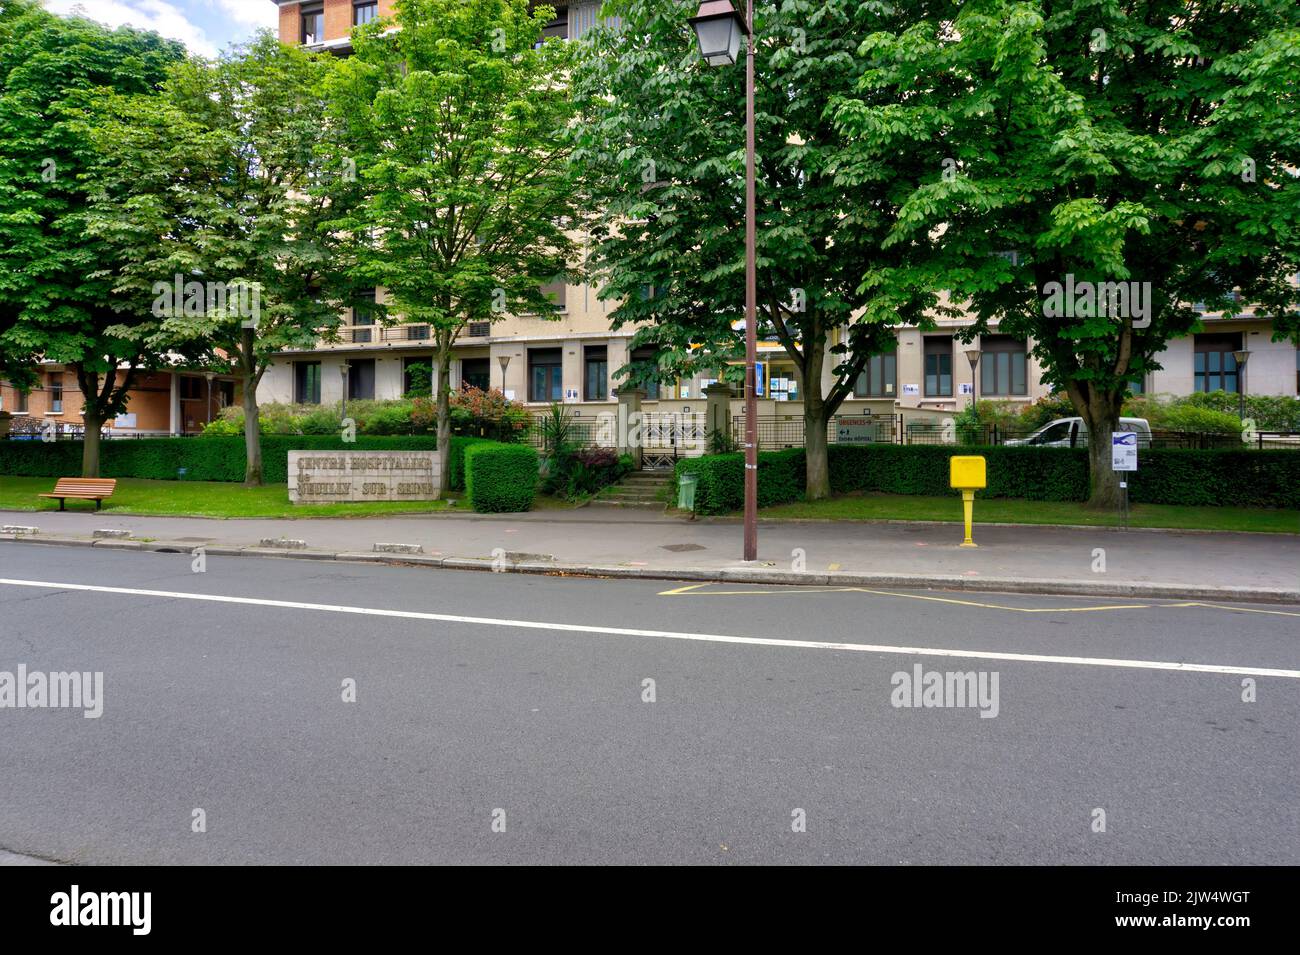 Paris, France - May 29, 2022: Exterior of Hospital Neuilly sur Seine Stock Photo